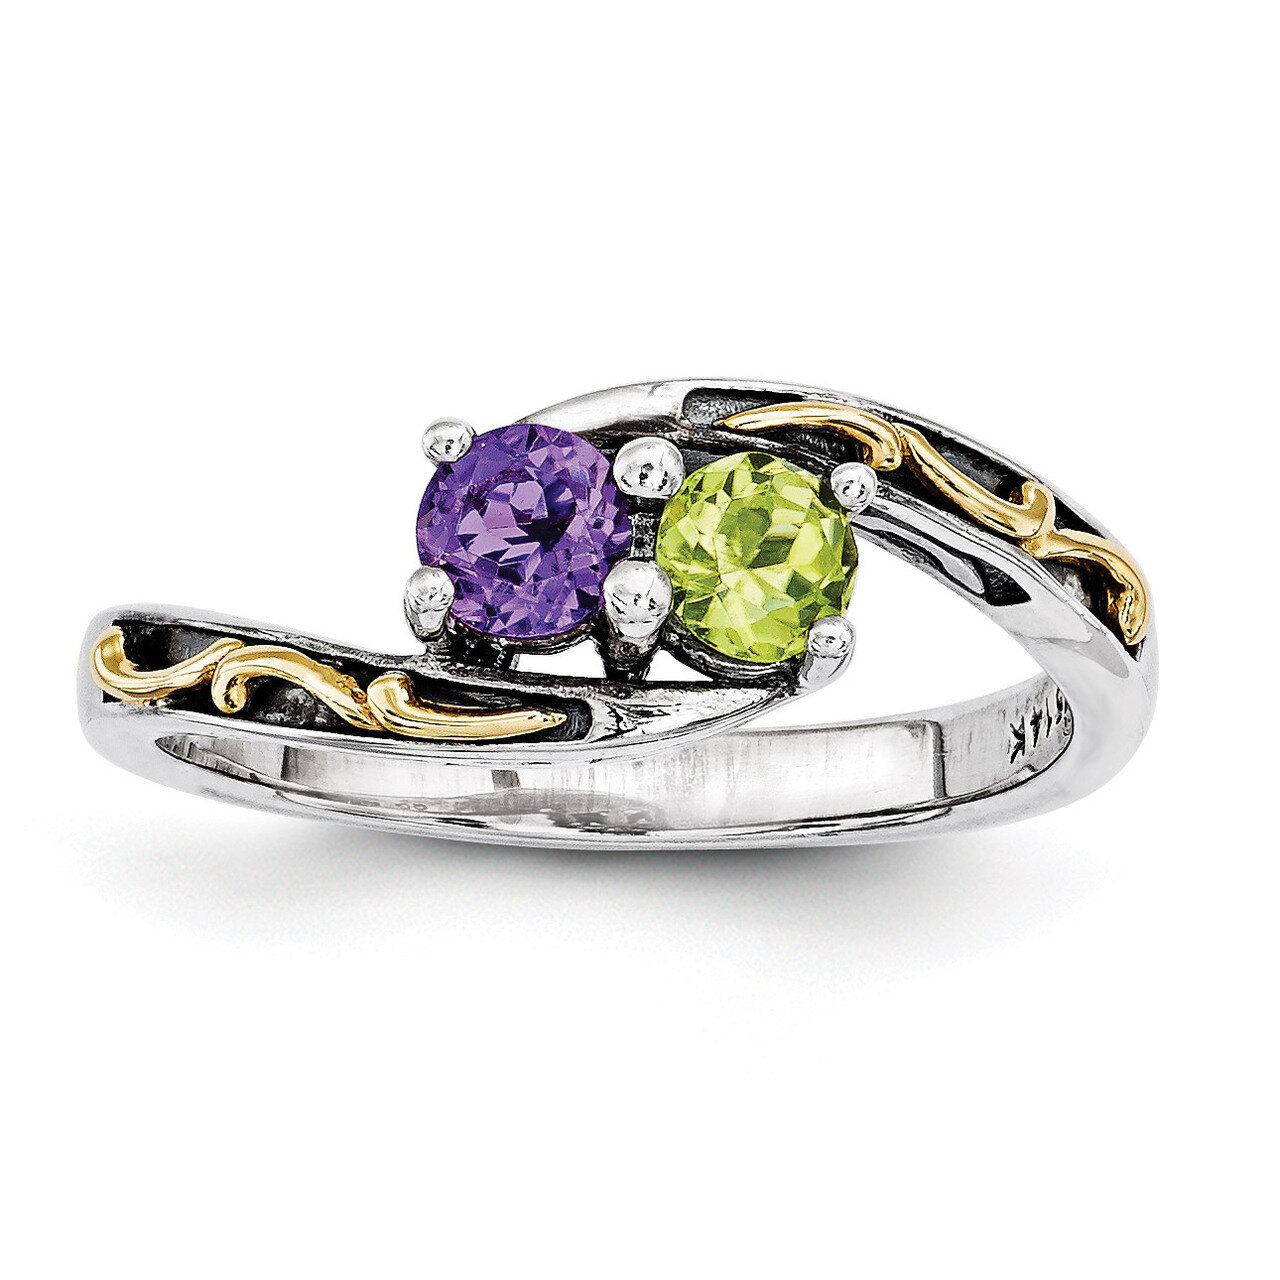 2 Birthstones & 14k Two-stone Mother's Ring Sterling Silver QMR15/2-10